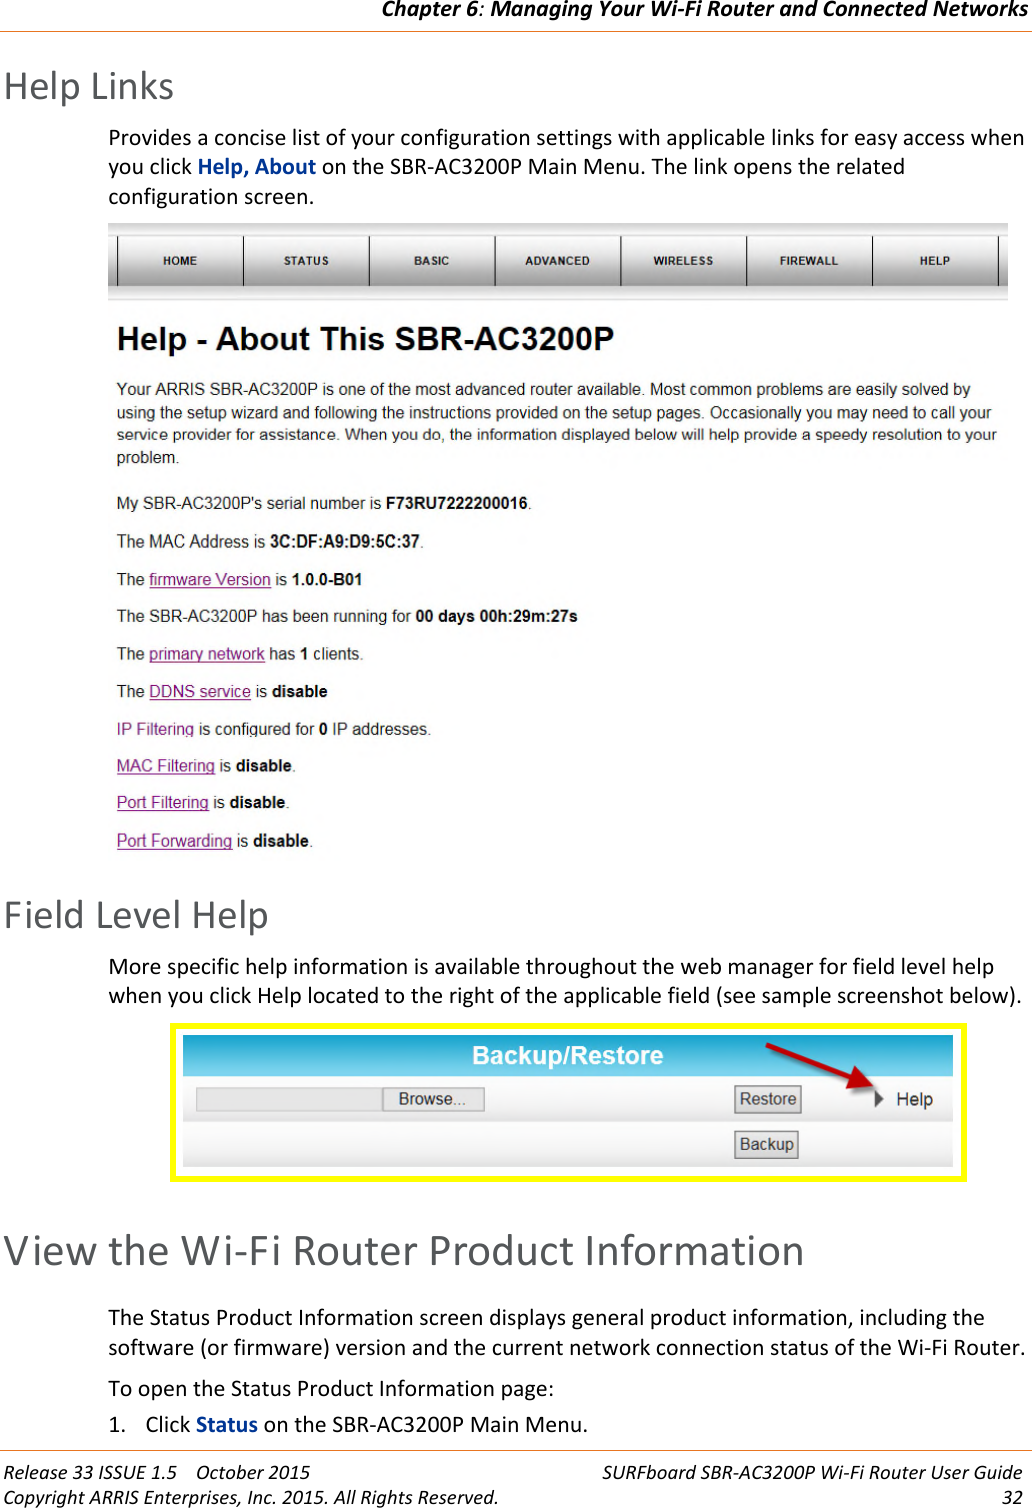 Chapter 6:Managing Your Wi-Fi Router and Connected NetworksRelease 33 ISSUE 1.5 October 2015 SURFboard SBR-AC3200P Wi-Fi Router User GuideCopyright ARRIS Enterprises, Inc. 2015. All Rights Reserved. 32Help LinksProvides a concise list of your configuration settings with applicable links for easy access whenyou click Help, About on the SBR-AC3200P Main Menu. The link opens the relatedconfiguration screen.Field Level HelpMore specific help information is available throughout the web manager for field level helpwhen you click Help located to the right of the applicable field (see sample screenshot below).View the Wi-Fi Router Product InformationThe Status Product Information screen displays general product information, including thesoftware (or firmware) version and the current network connection status of the Wi-Fi Router.To open the Status Product Information page:1. Click Status on the SBR-AC3200P Main Menu.